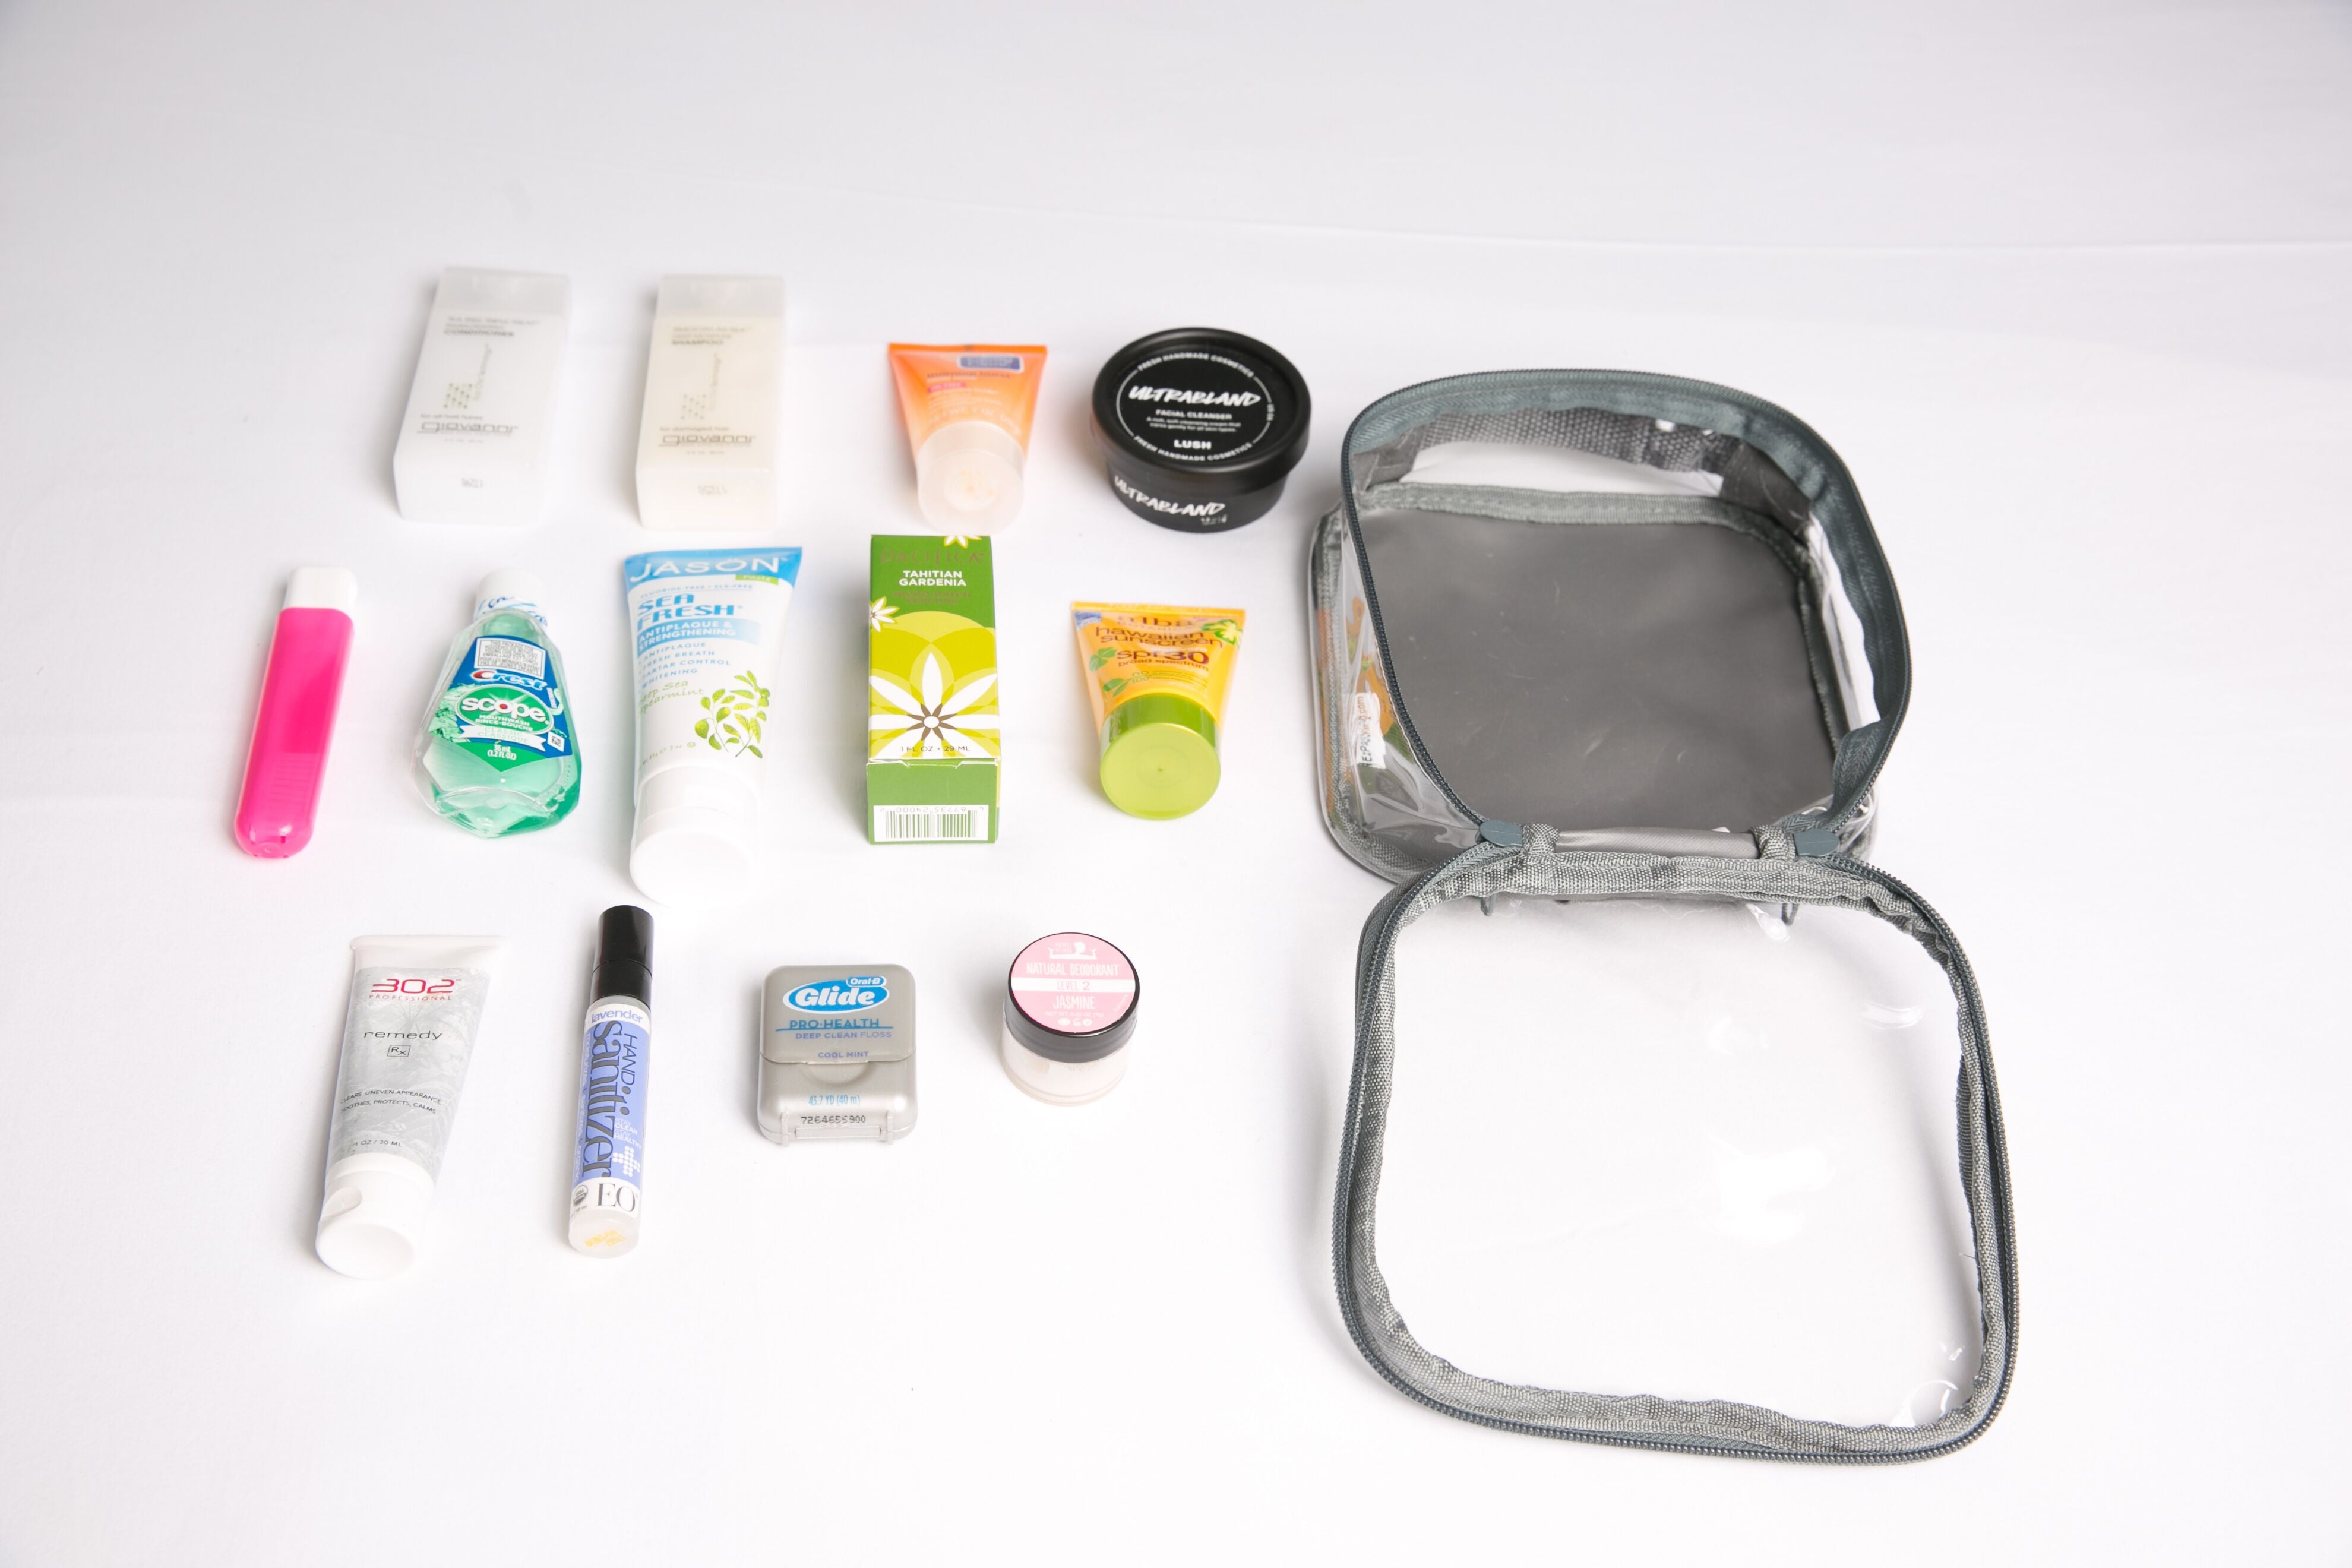 How to prepare toiletries before packing into suitcase